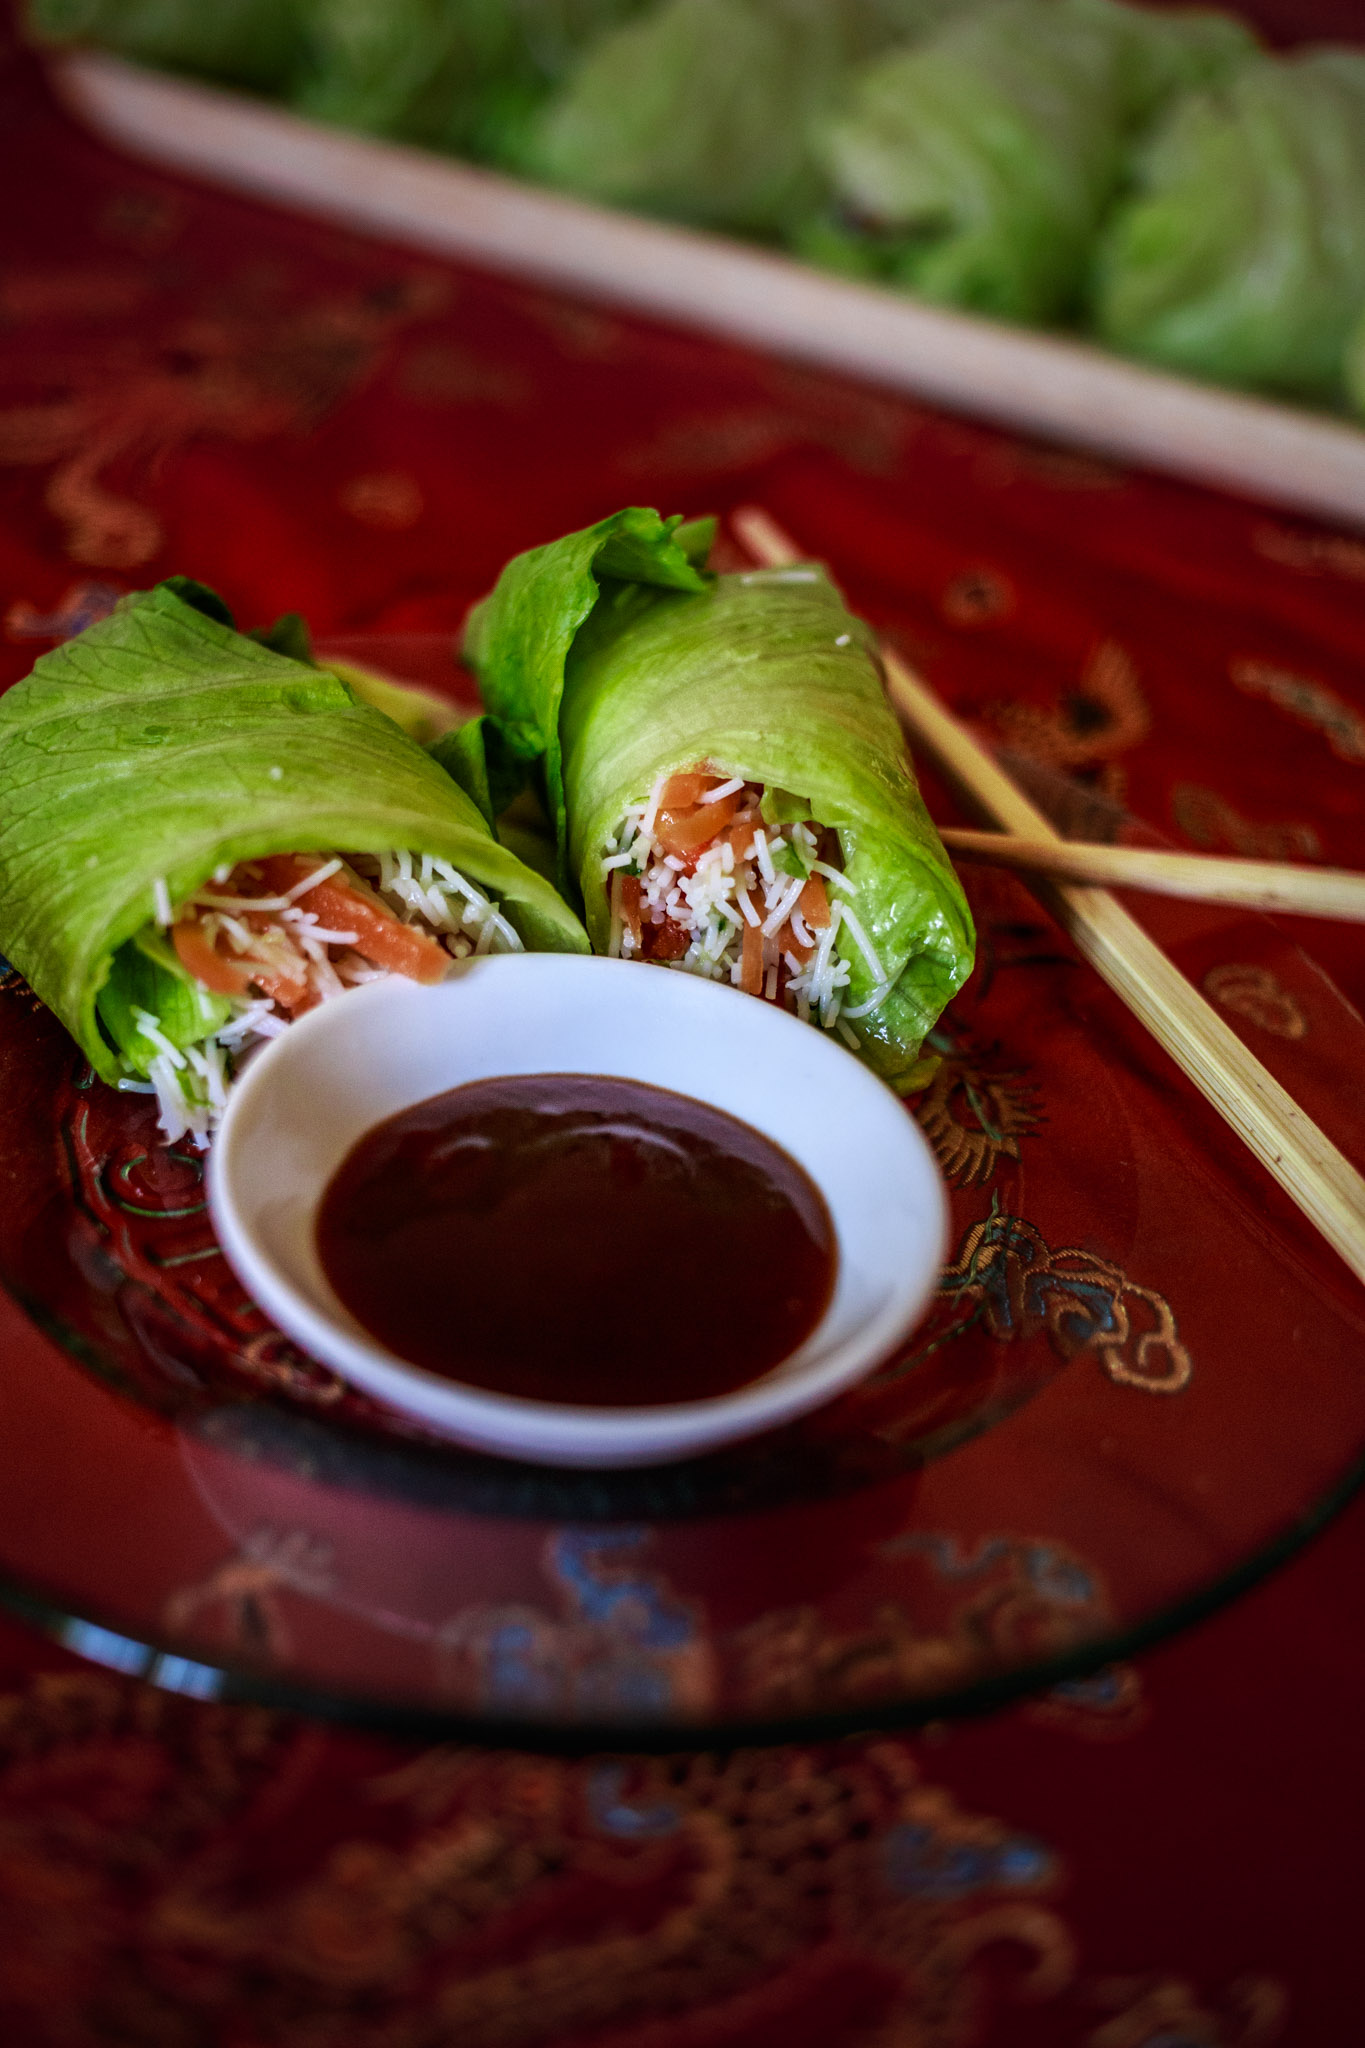 Food Photo of Lettuce Wraps stuffed with Rice Noodles and Vegetables with Hoisin Sauce